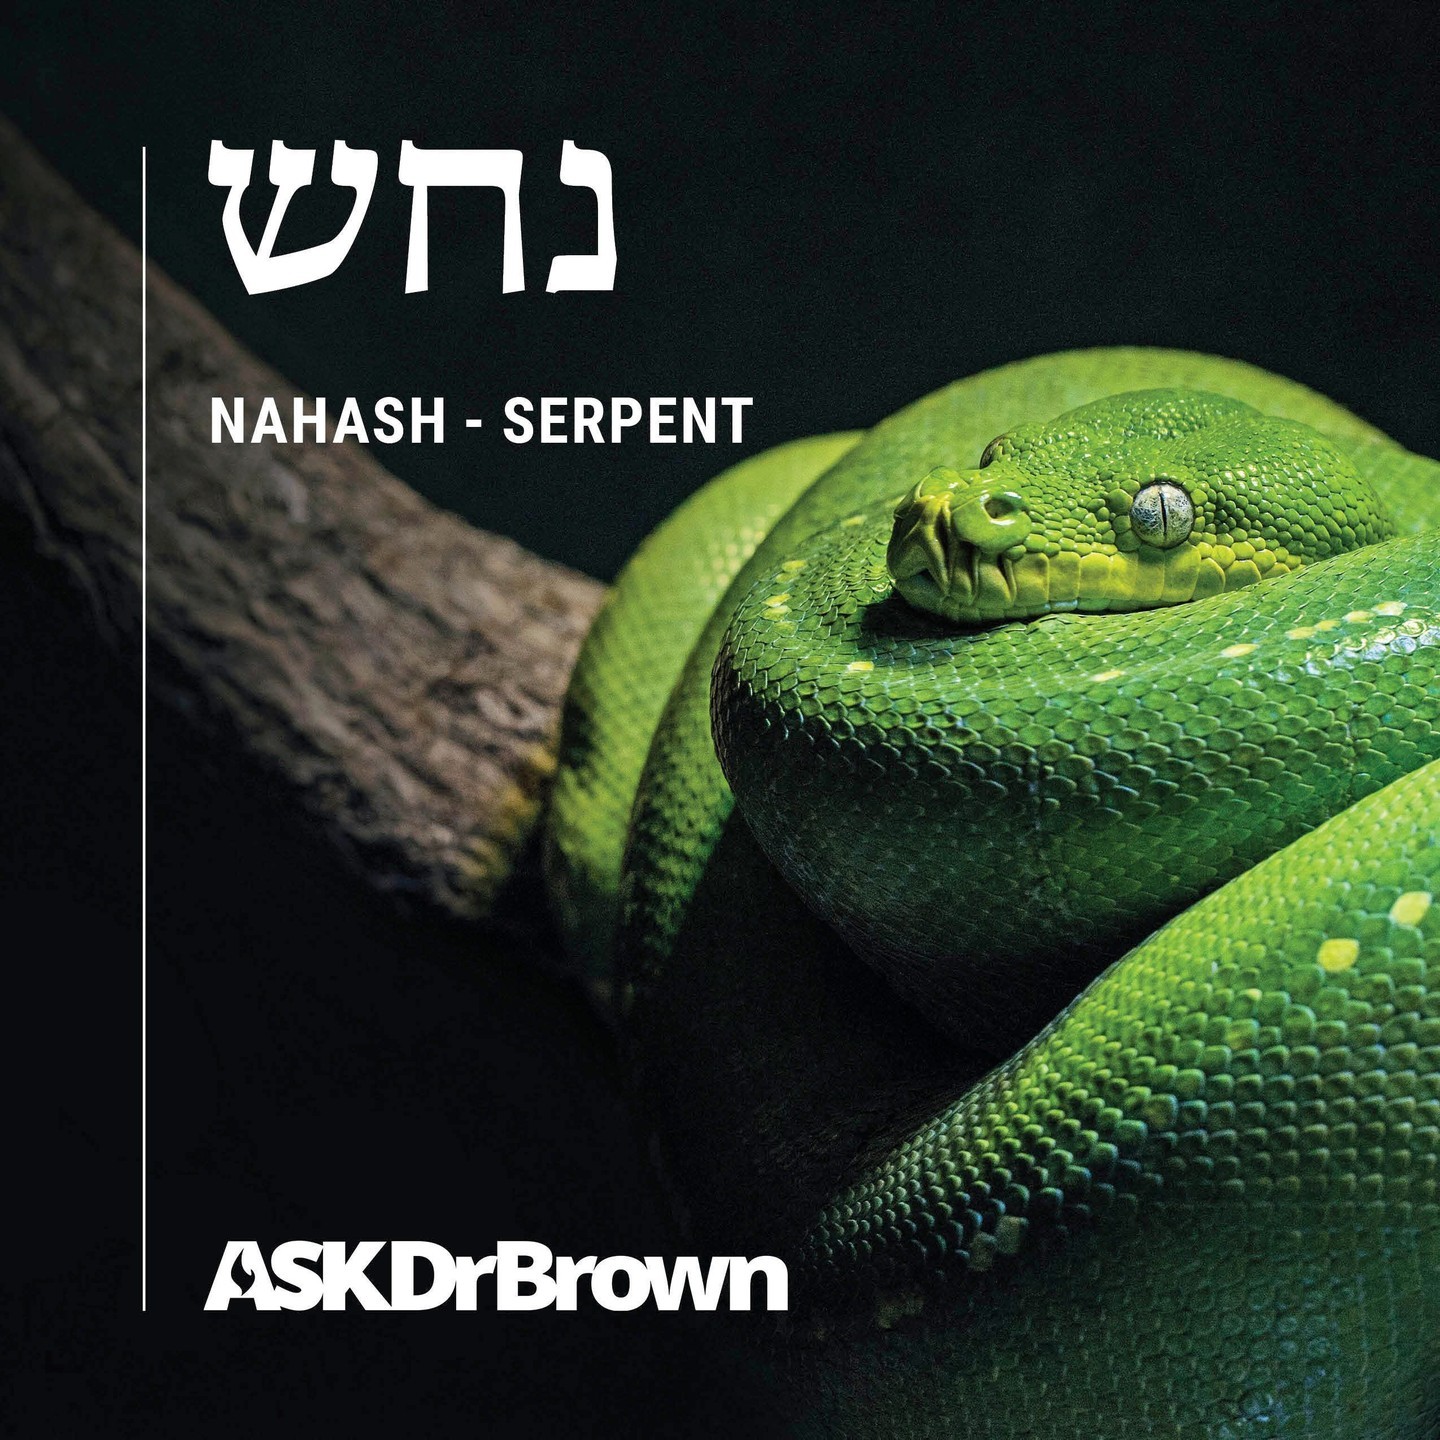 “Now the serpent was more crafty than any of the wild animals the Lord God had made. He said to the woman, ‘Did God really say, ‘You must not eat from any tree in the garden’?’.” Psalms 3:3
#askdrbrown #hebrew #biblicallanguage #dailywisdom #dailybibleverse  #dailyencouragement #GodsWord #verseoftheday